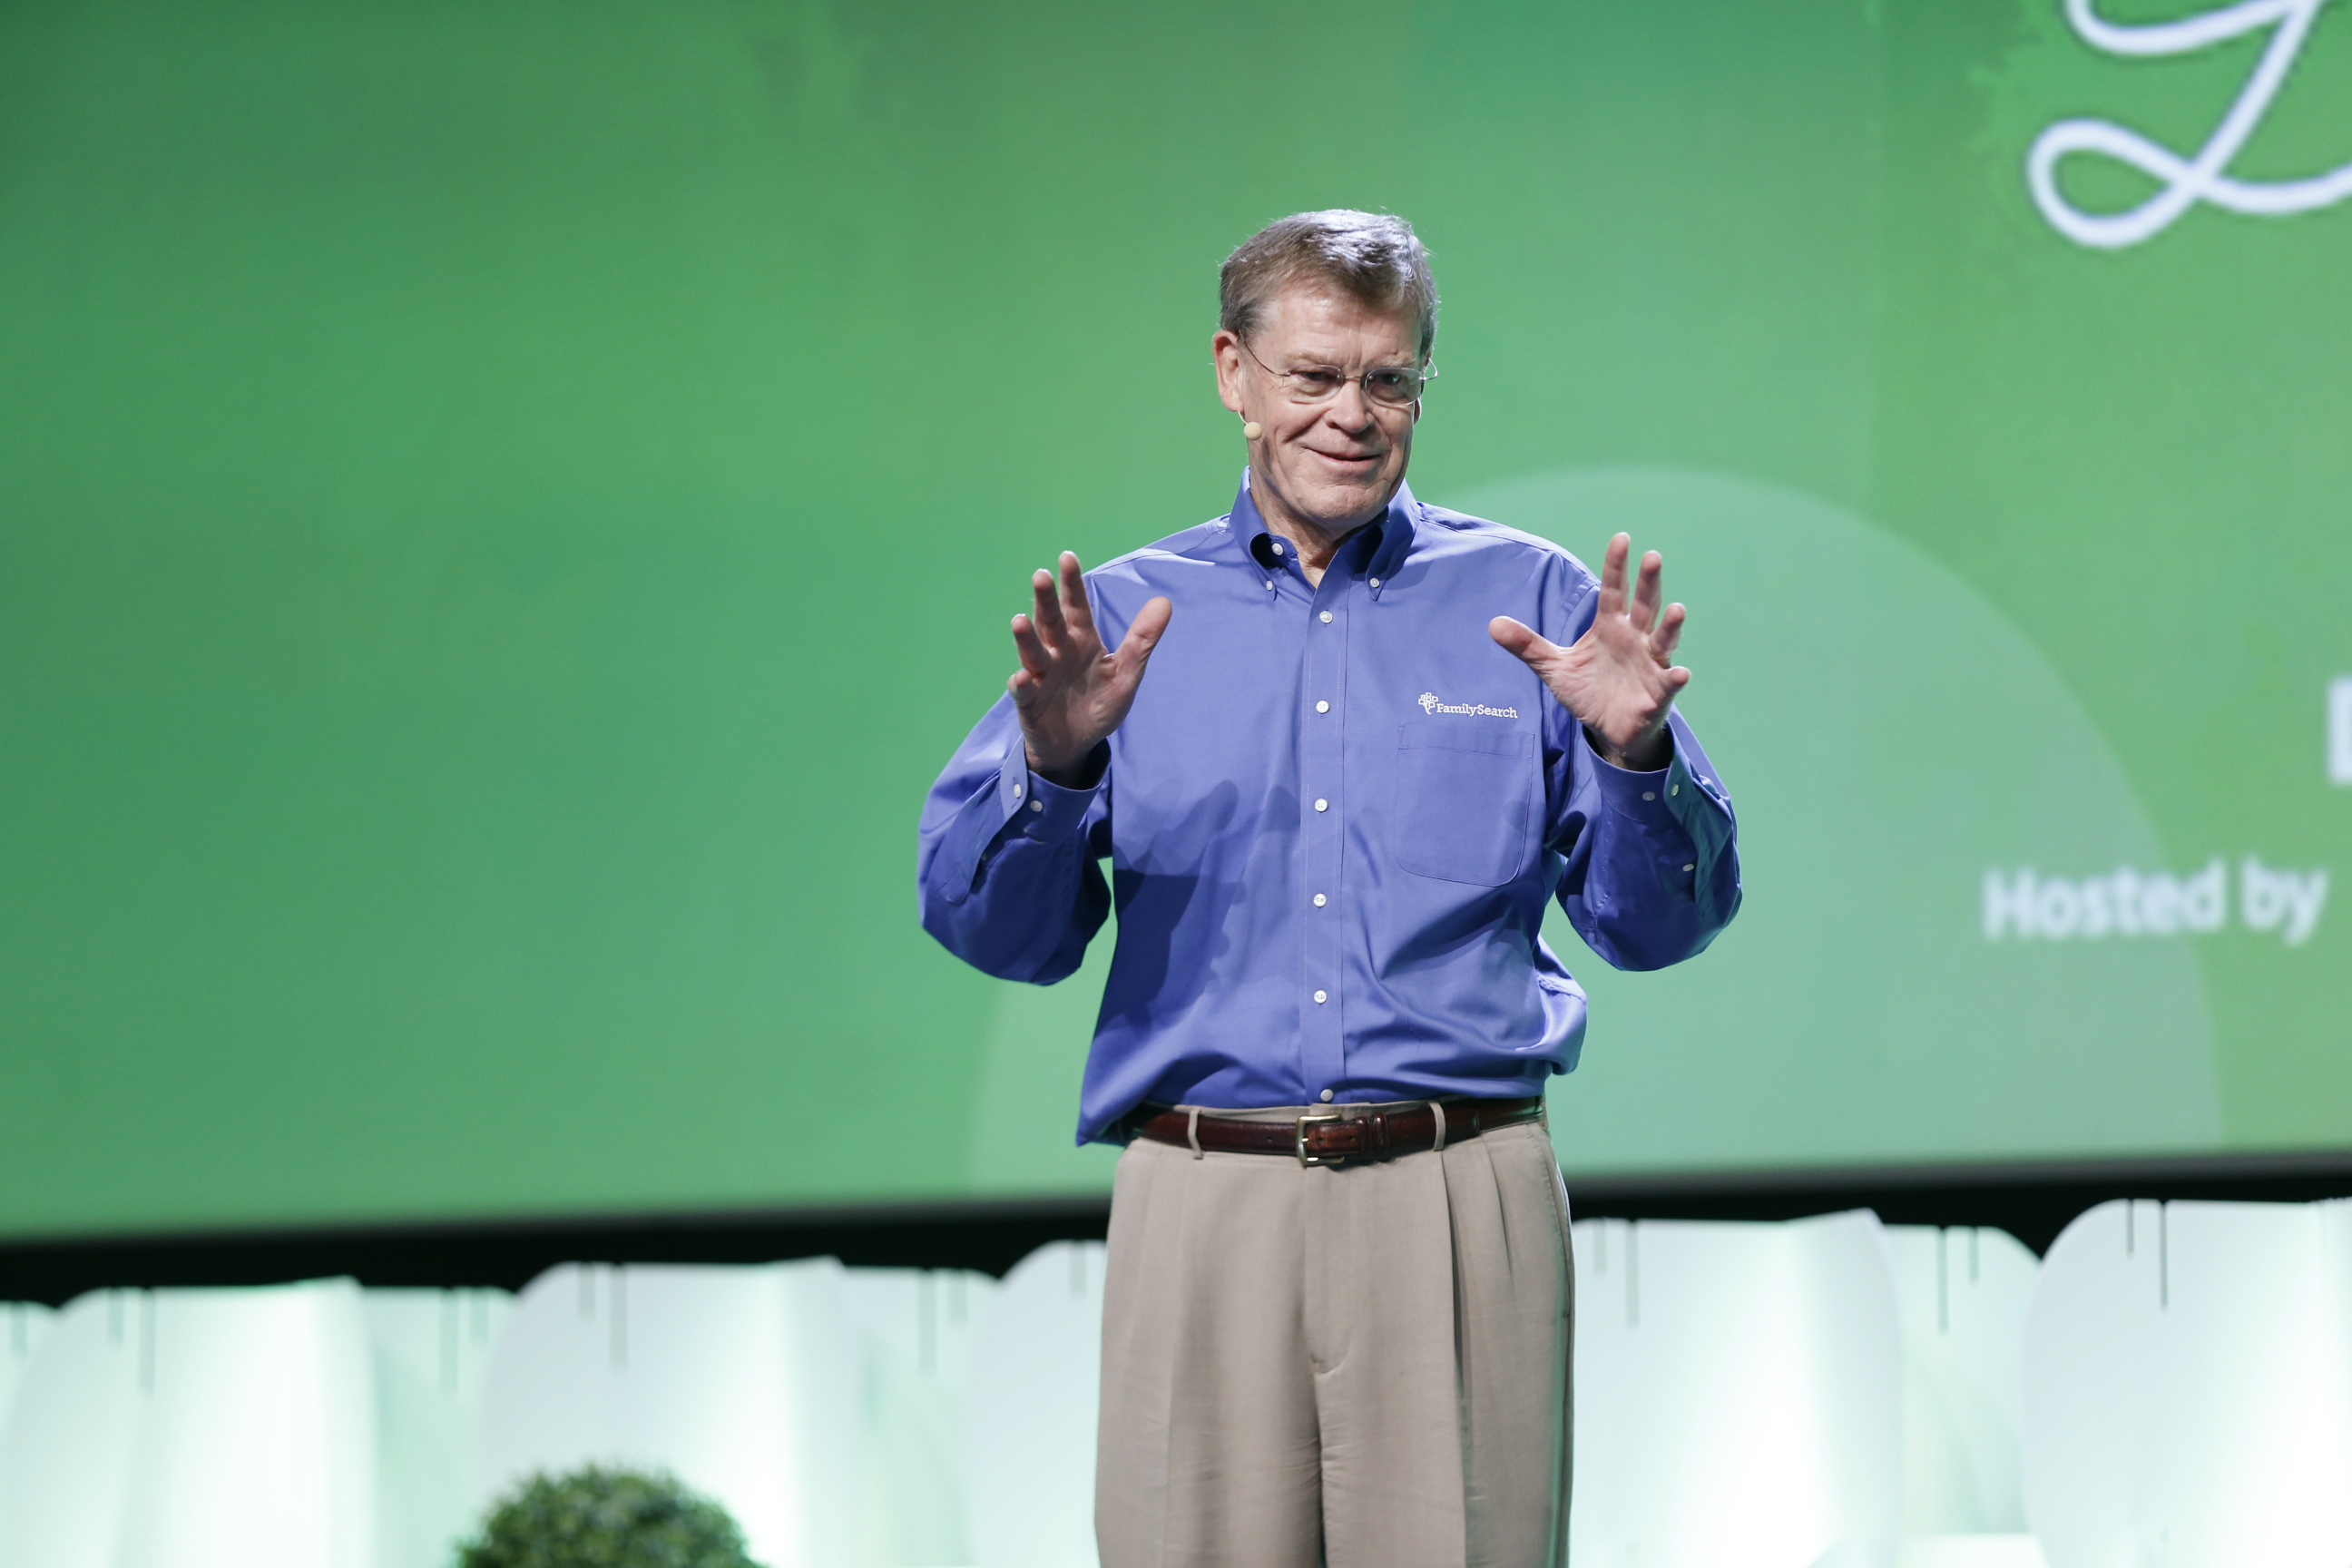 RootsTech Brimhall2 2015